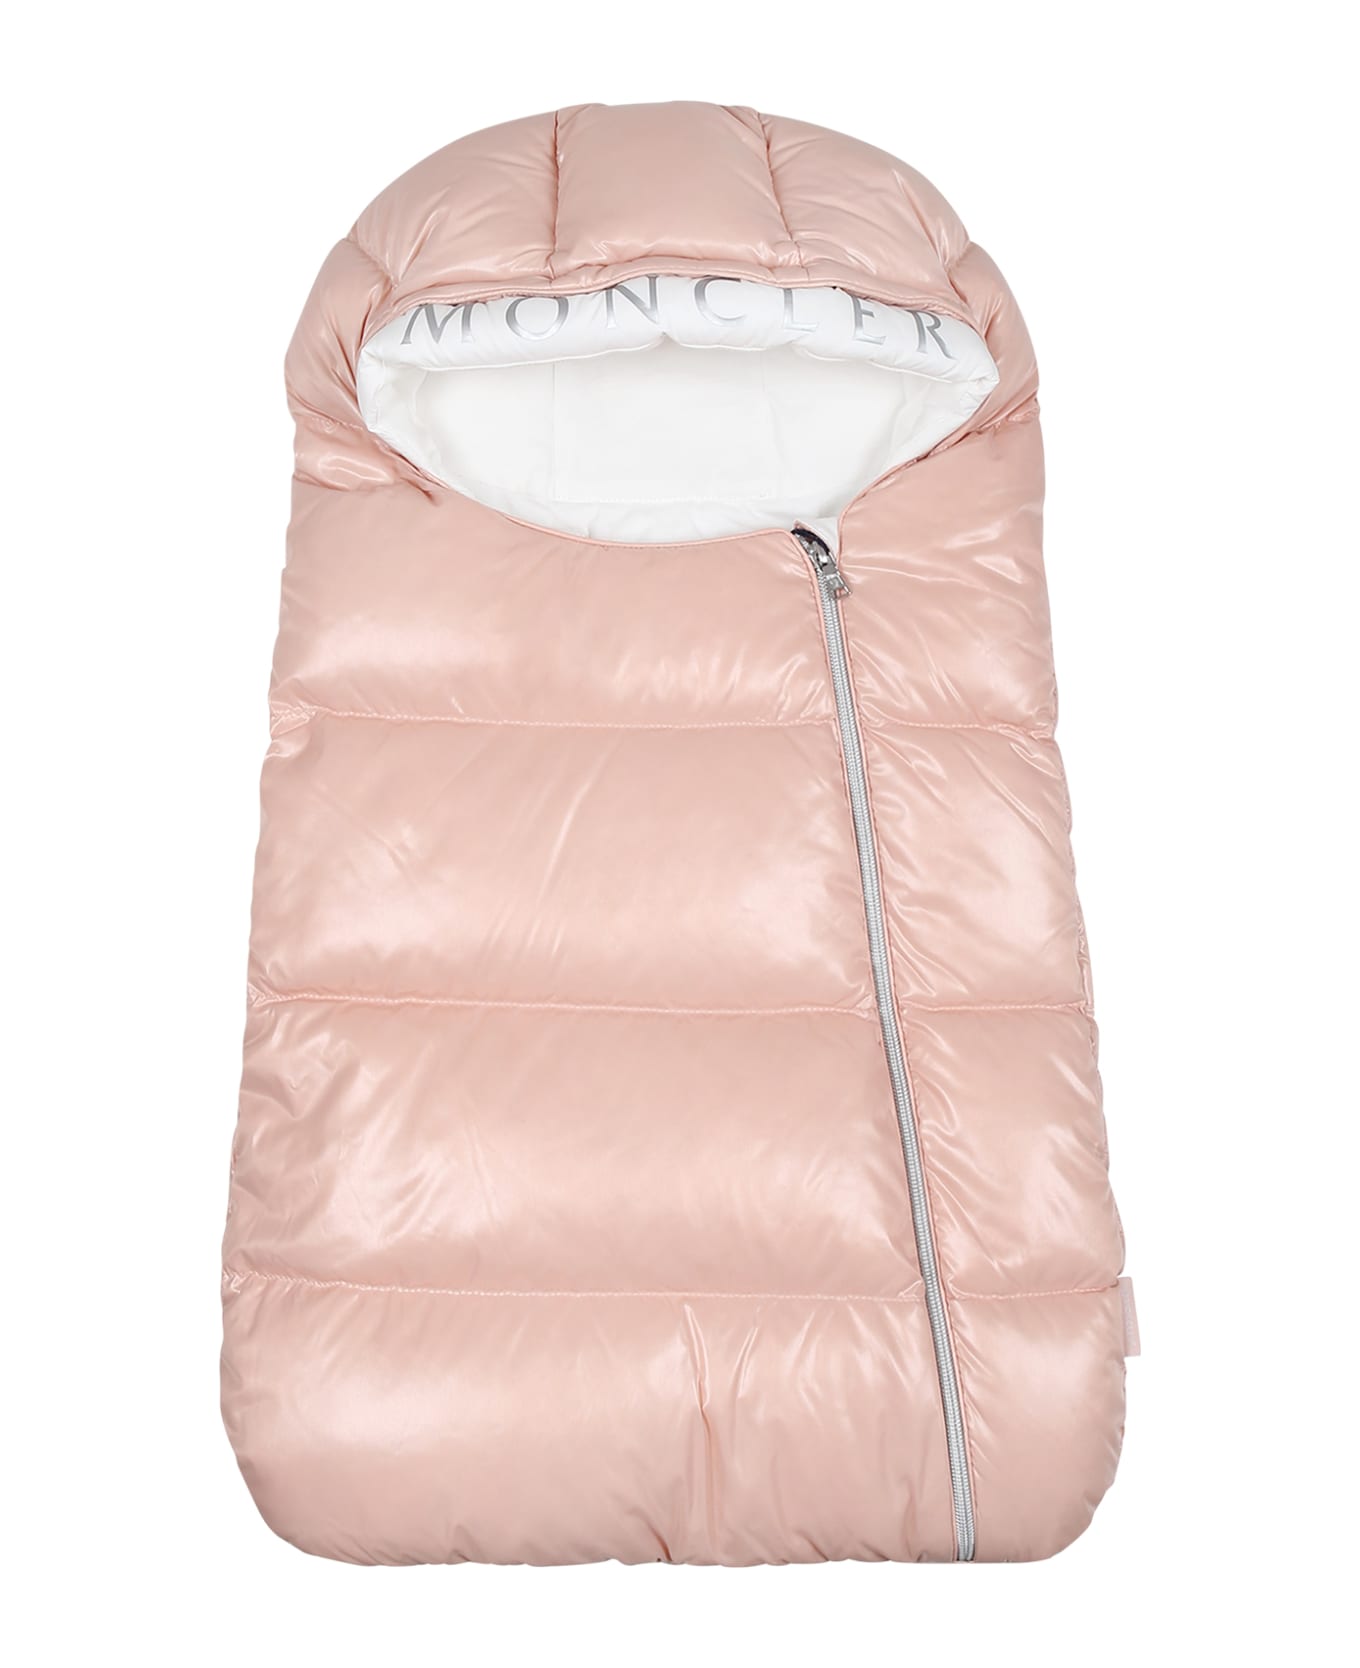 Moncler Pink Sleeping Bag For Baby Girl With Logo - Pink